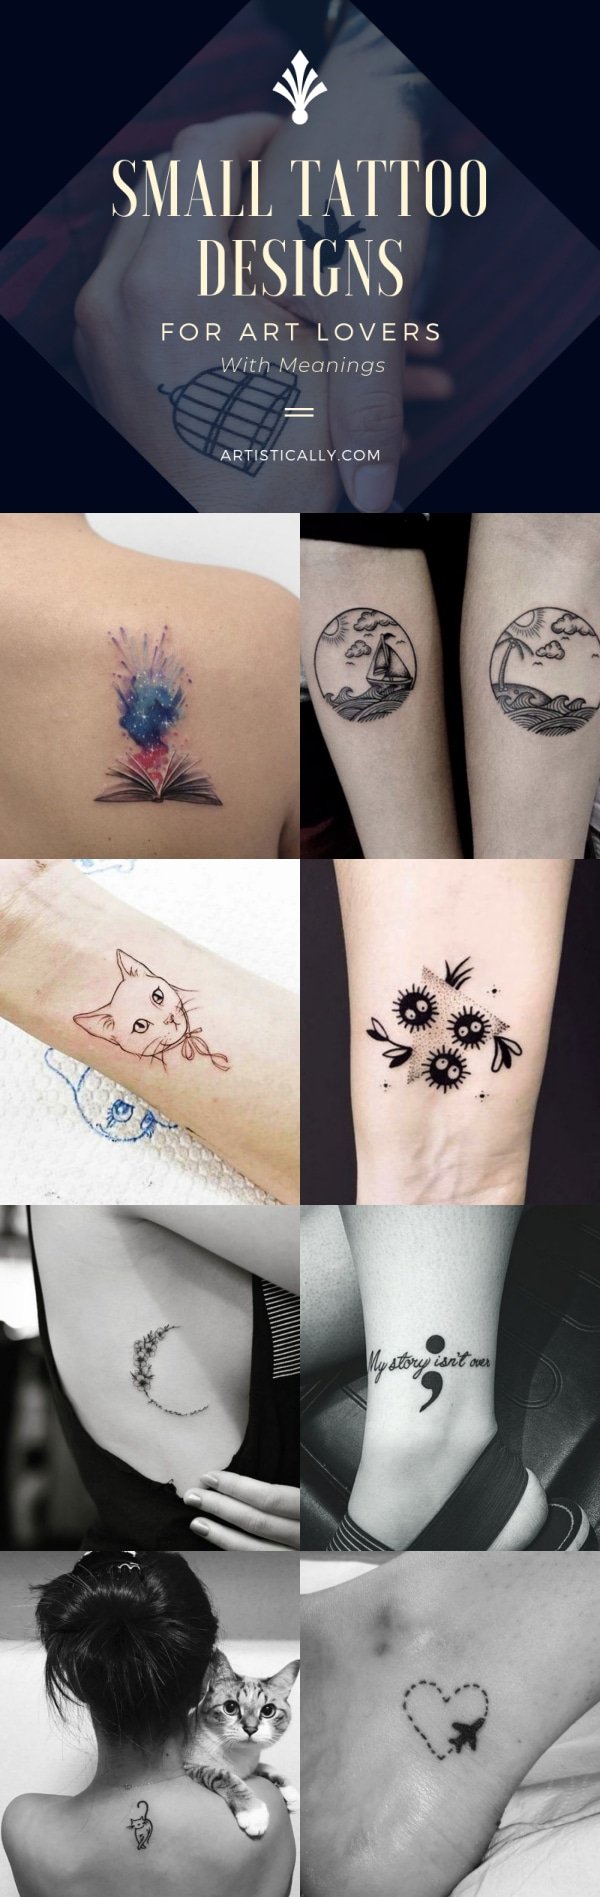 11+ Art Tattoo Ideas You'll Have To See To Believe! - alexie